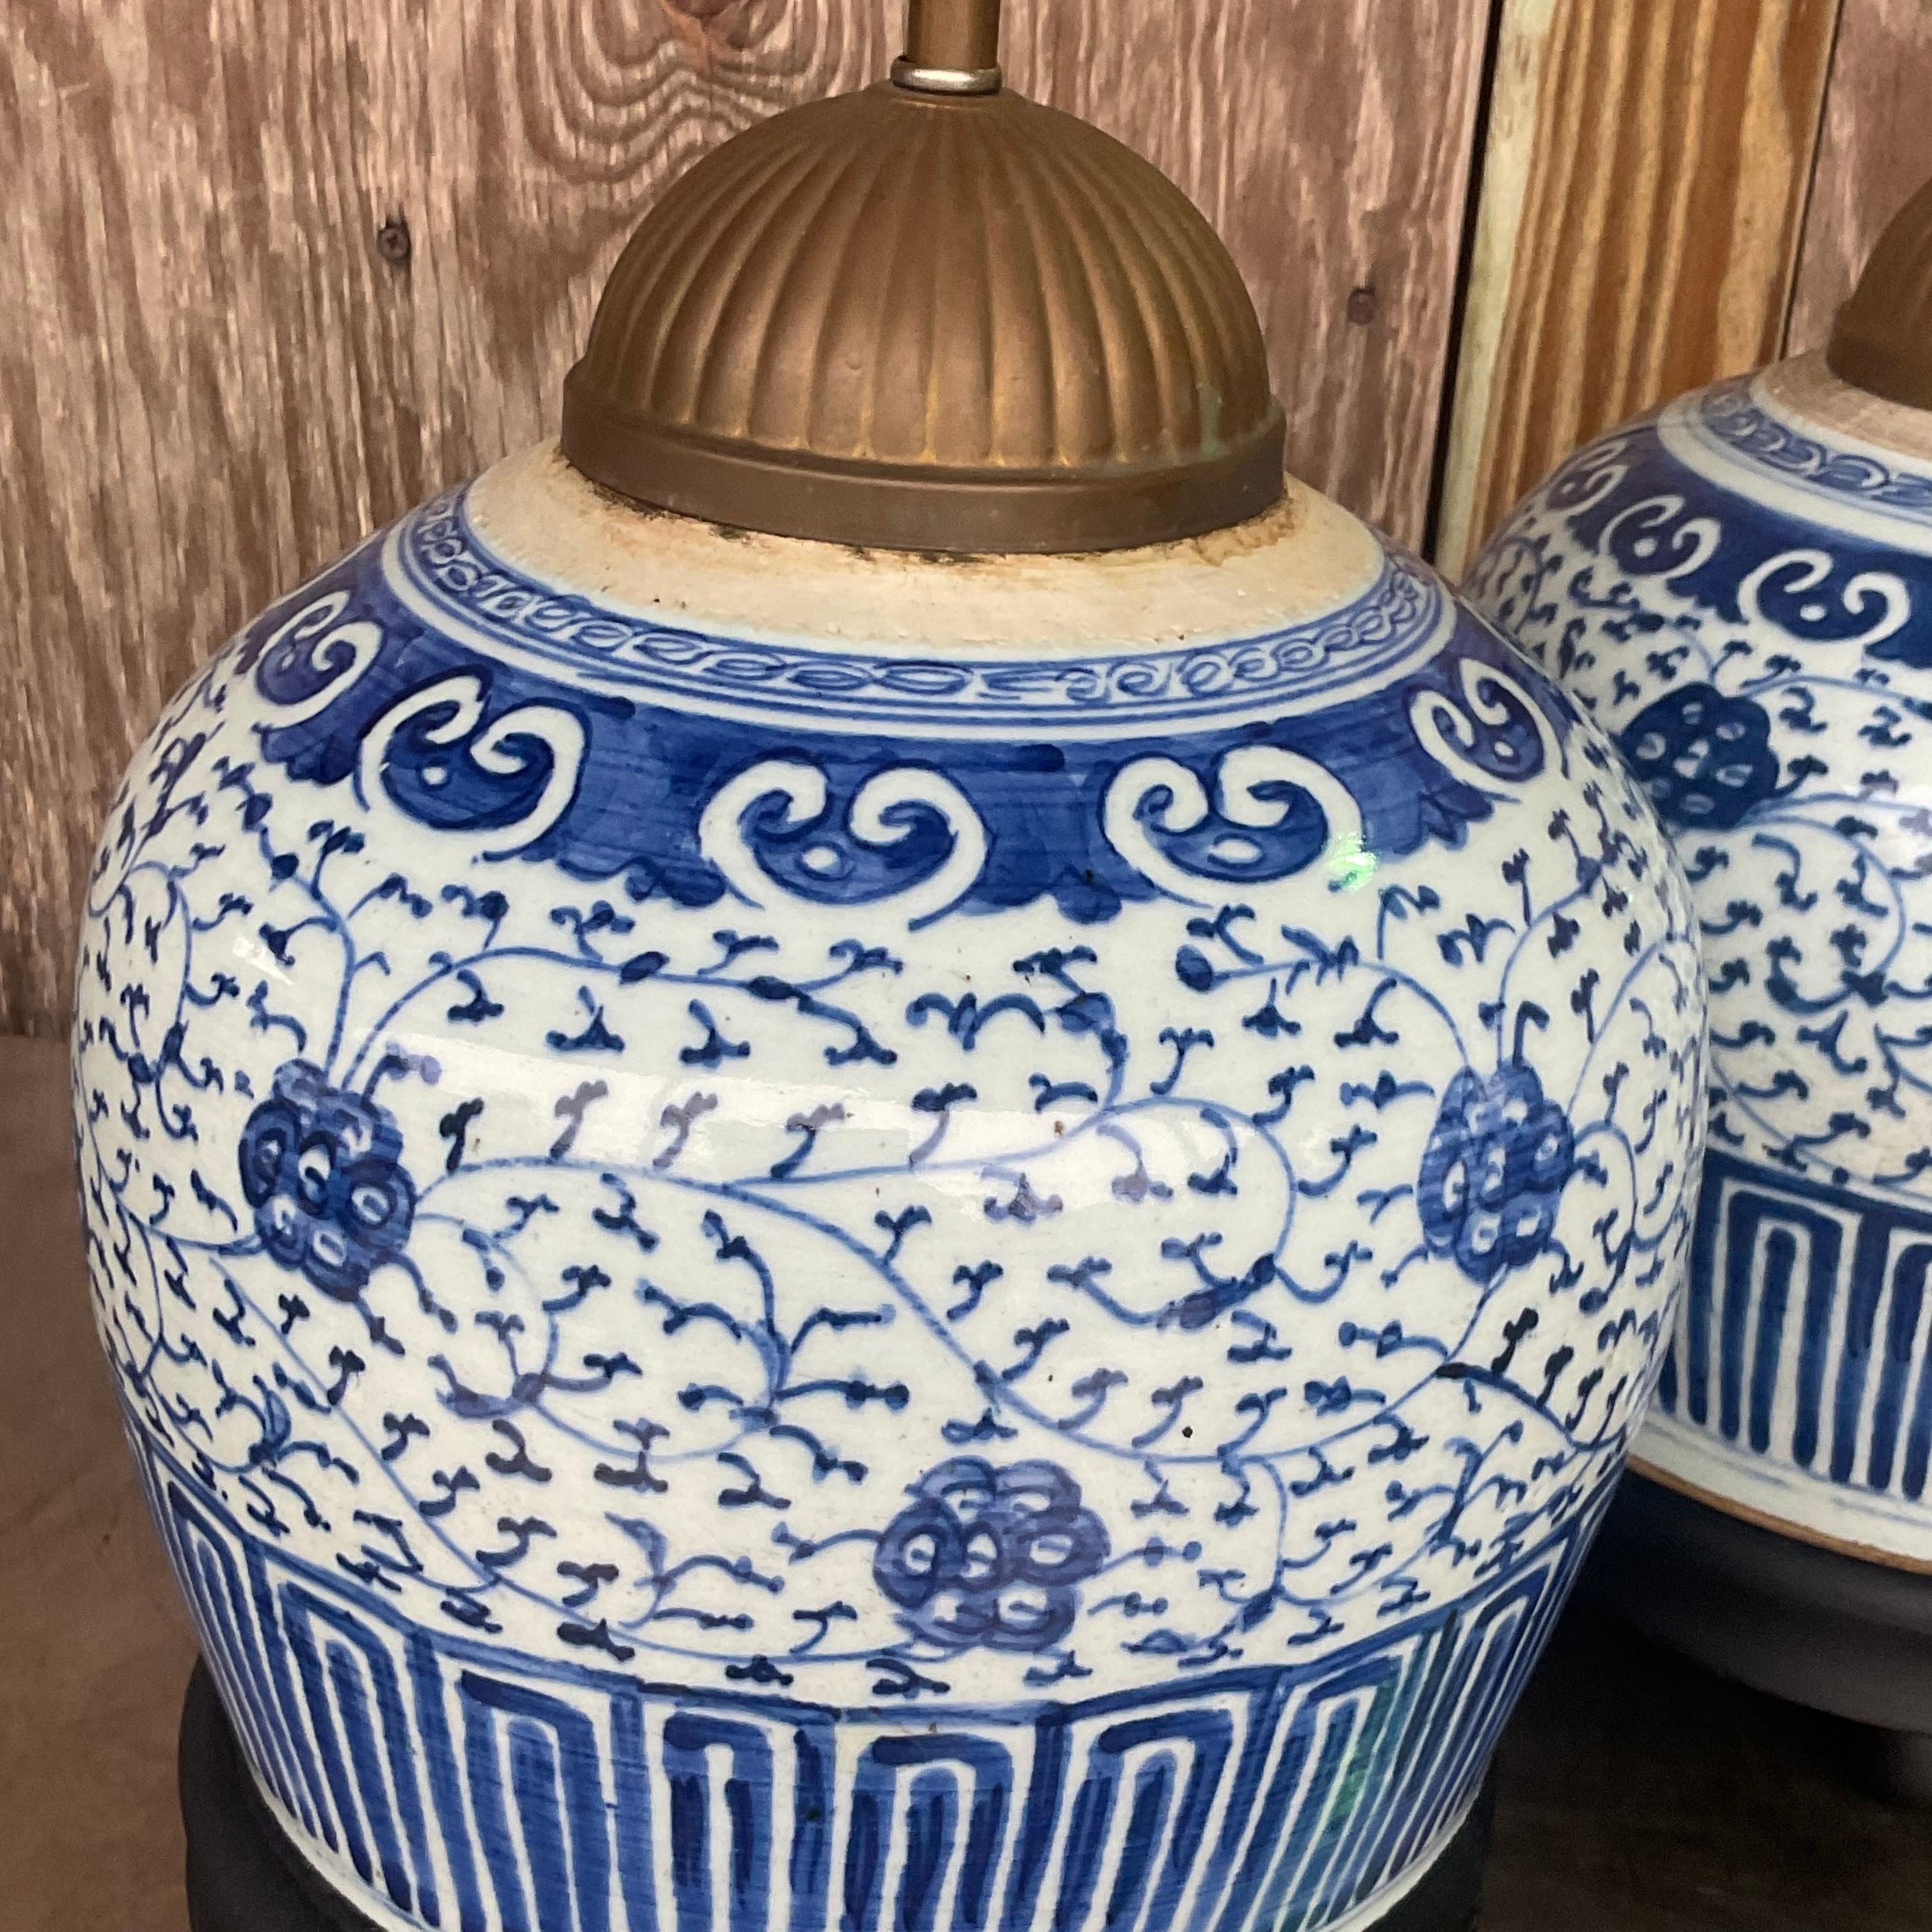 American Vintage Asian Blue and White Ceramic Lamps - a Pair For Sale